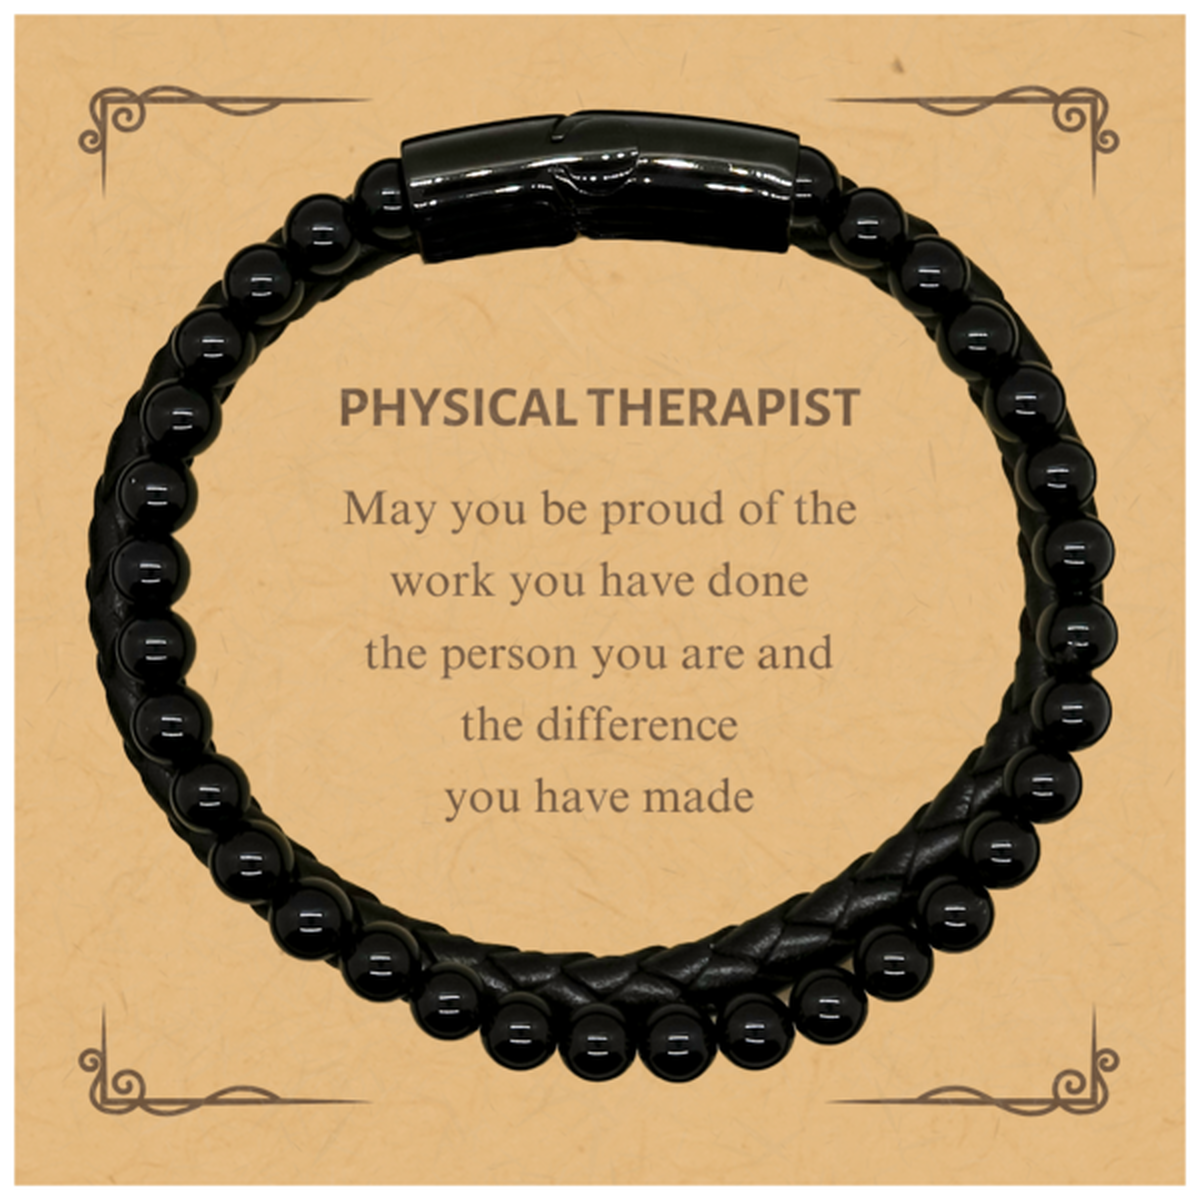 Physical Therapist May you be proud of the work you have done, Retirement Physical Therapist Stone Leather Bracelets for Colleague Appreciation Gifts Amazing for Physical Therapist